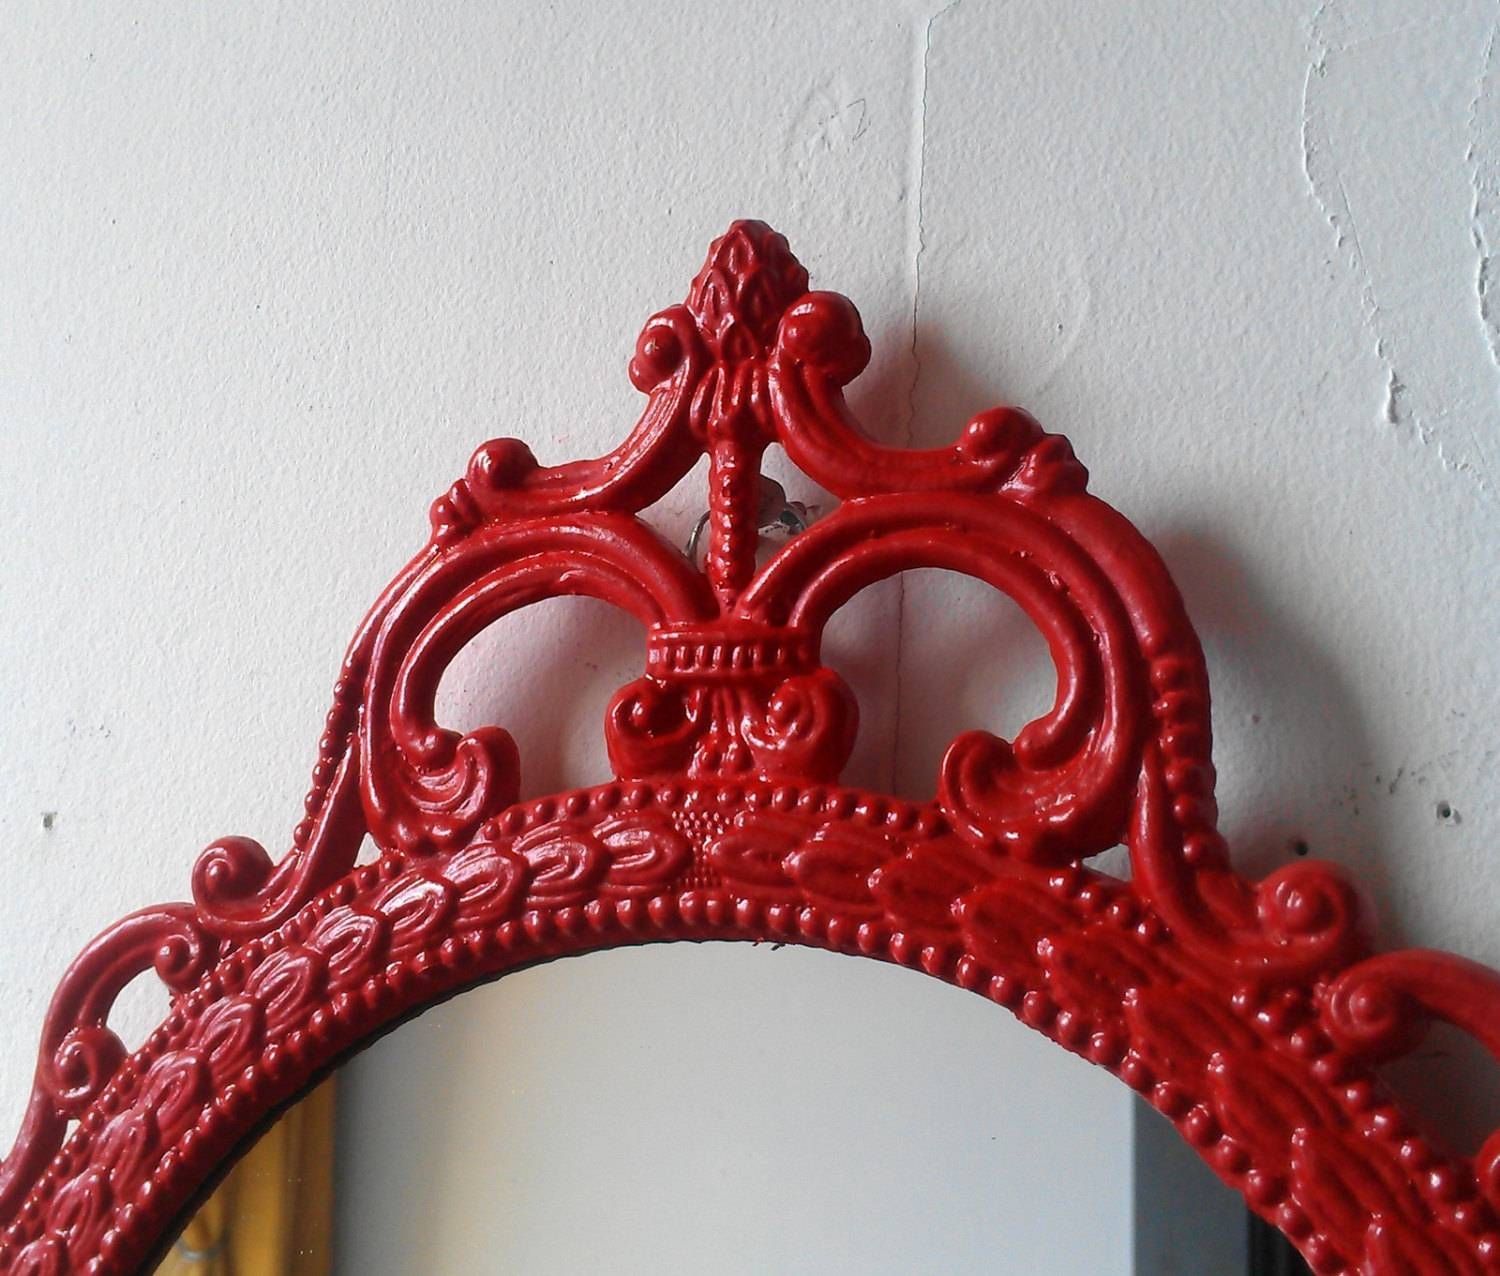 Oval Mirror In Vintage Metal Frame Ornate Decorative Framed Within Ornate Oval Mirrors (View 24 of 25)